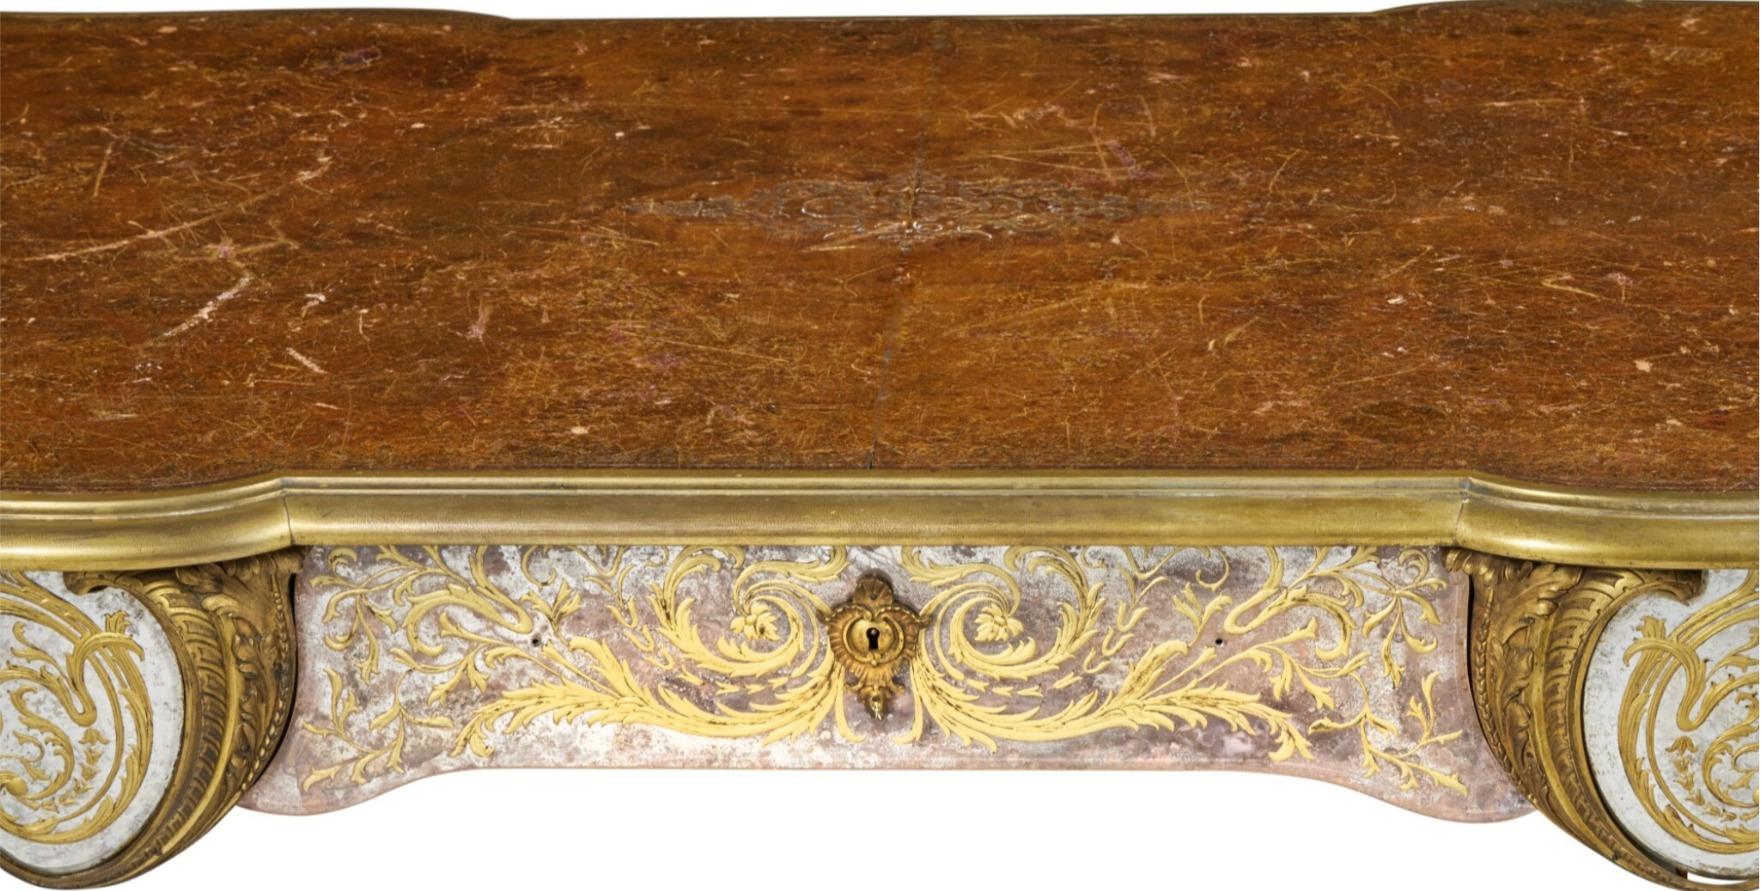 The Duke and Duchess of Windsor: An Exquisite Ormolu and Églomisé Bureau Plat In Good Condition For Sale In New York, NY